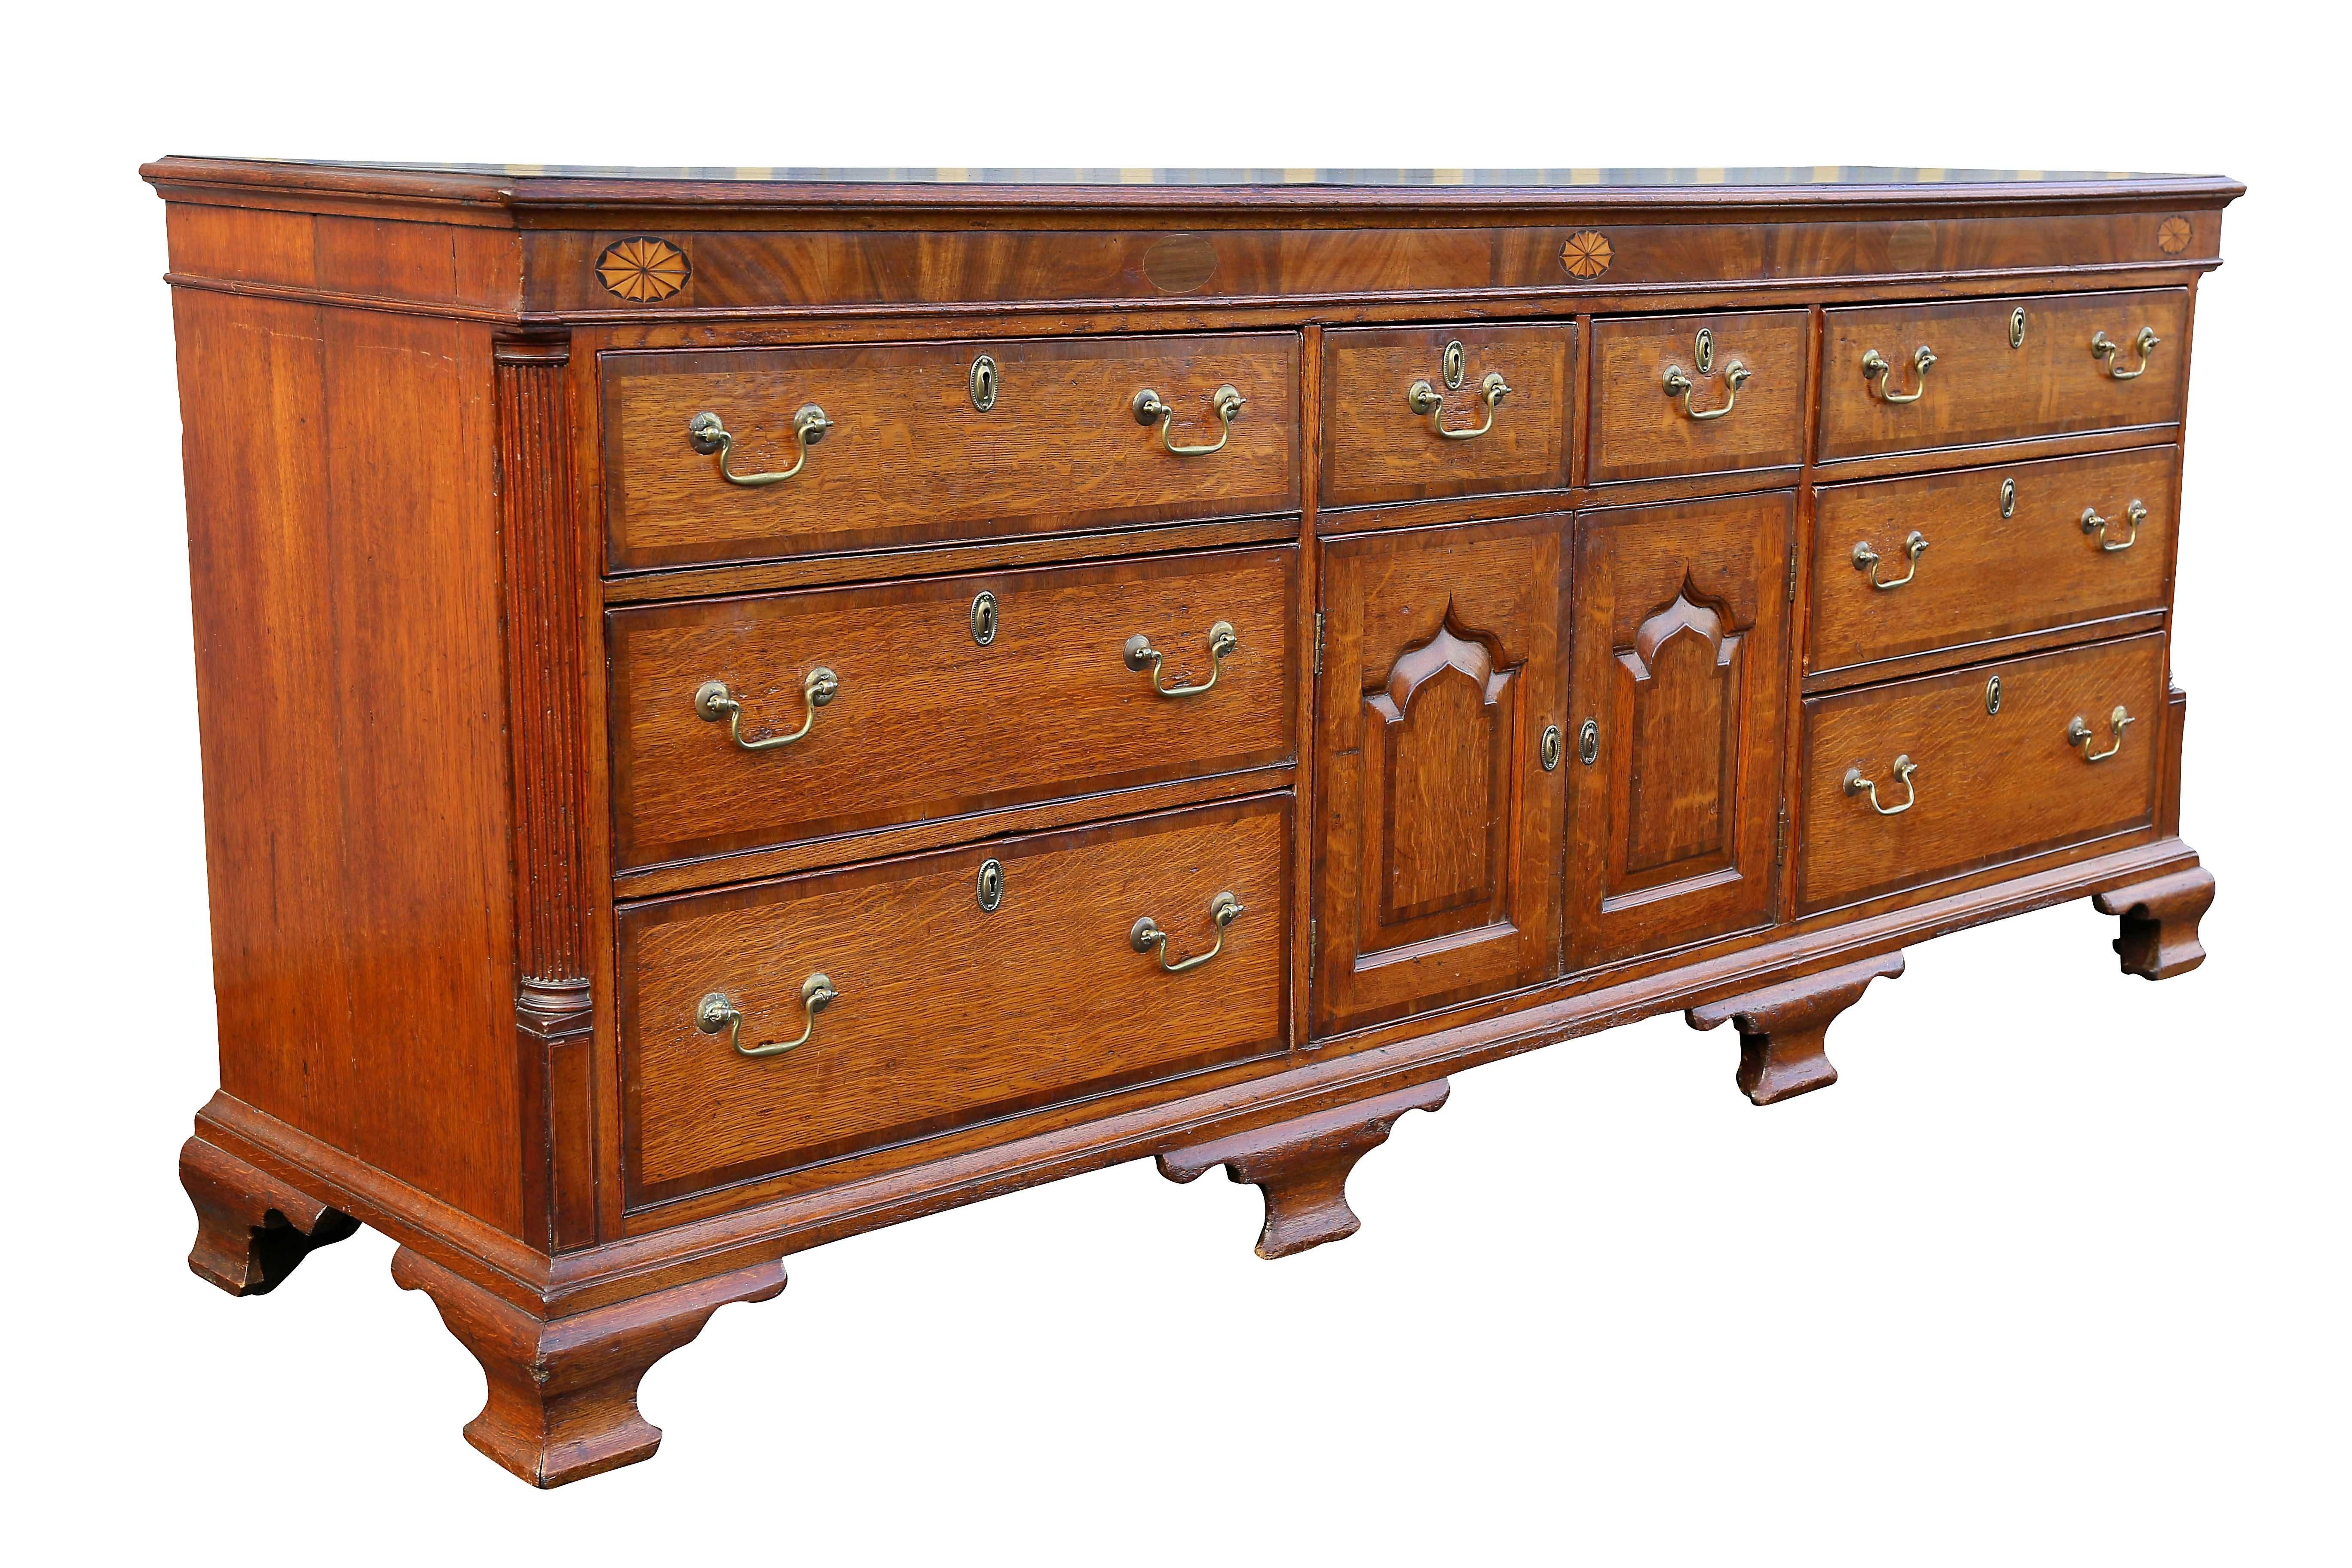 Rectangular top with molded edge over a frieze with paterae inlays, over two small drawers over a pair of panelled cabinet doors flanked by three graduated drawers, all within fluted quarter columns, raised on ogee bracket feet.